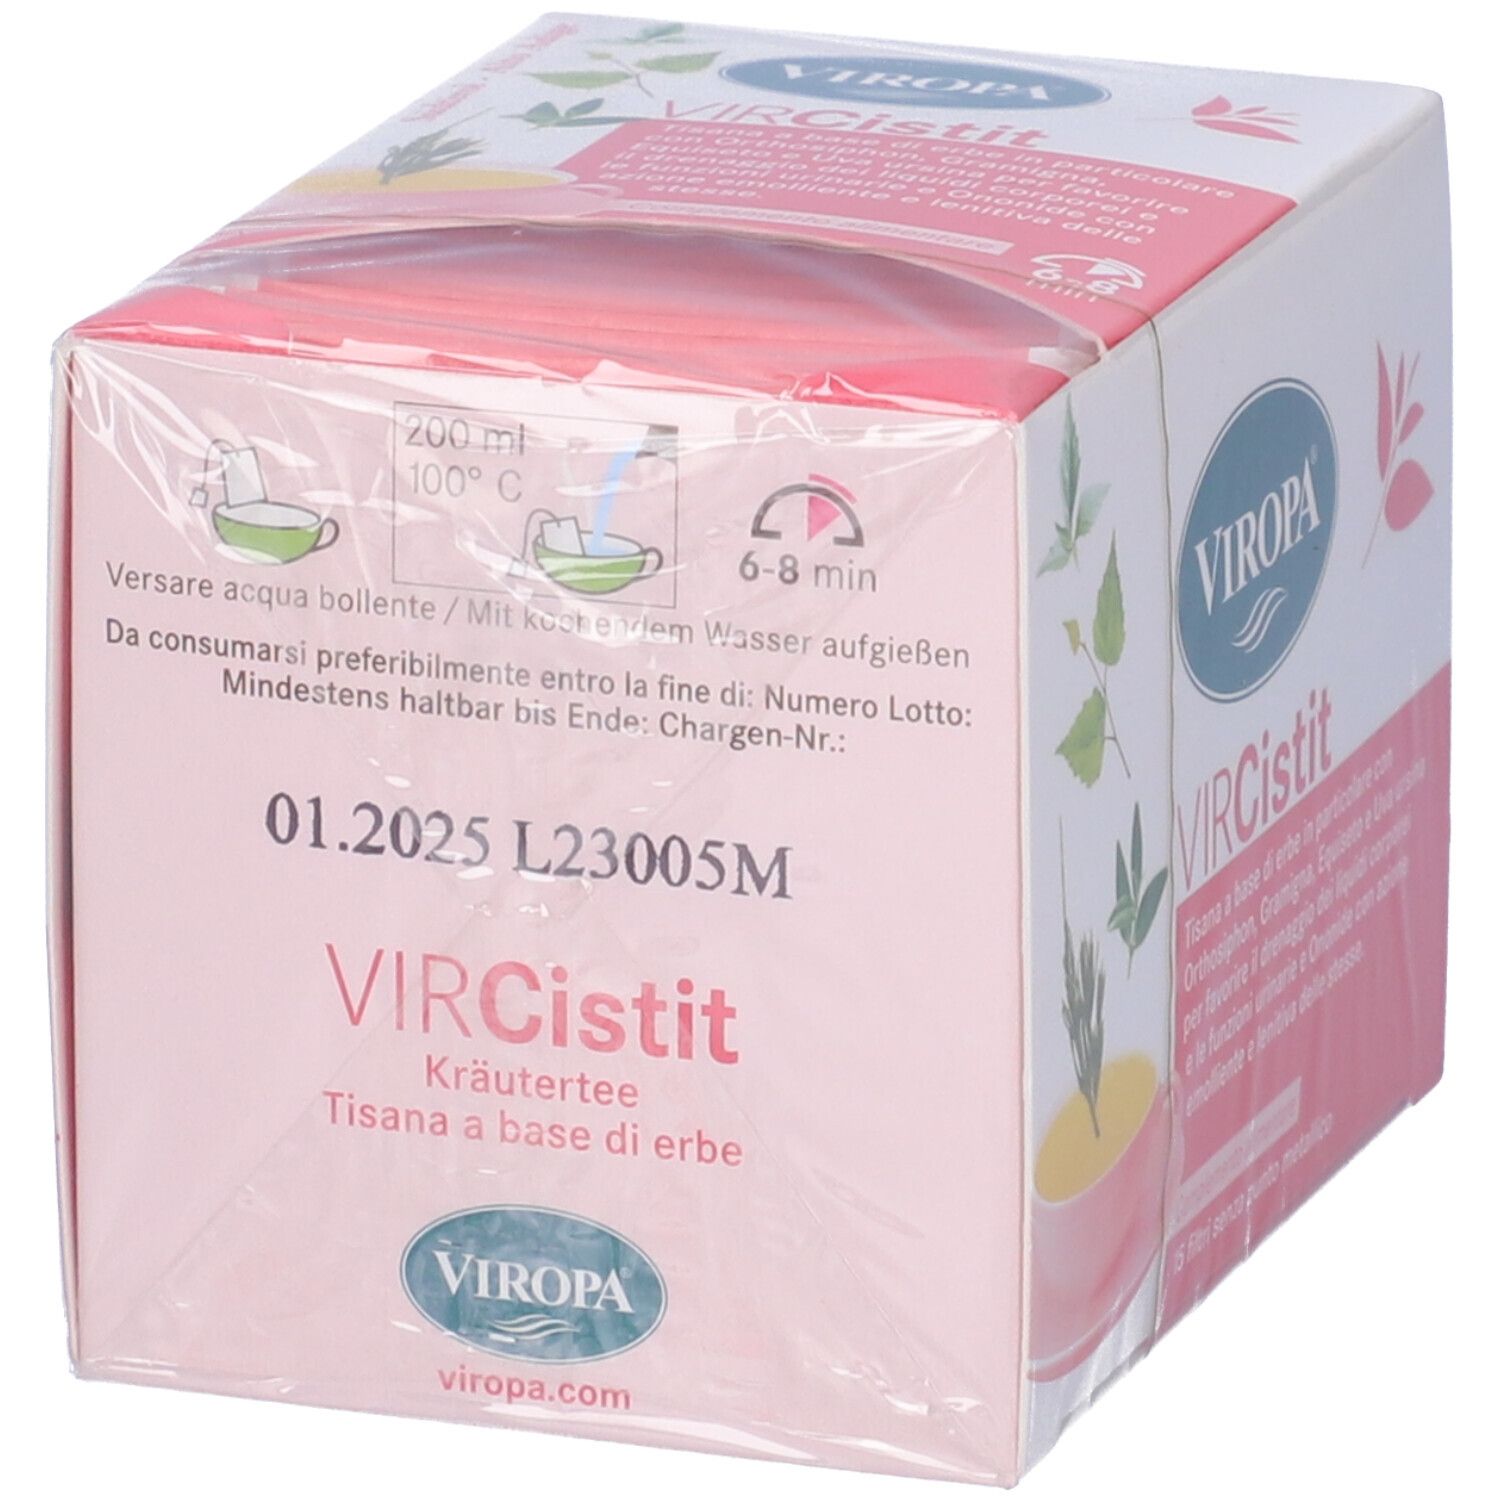 Viropa Vircist 15Bust